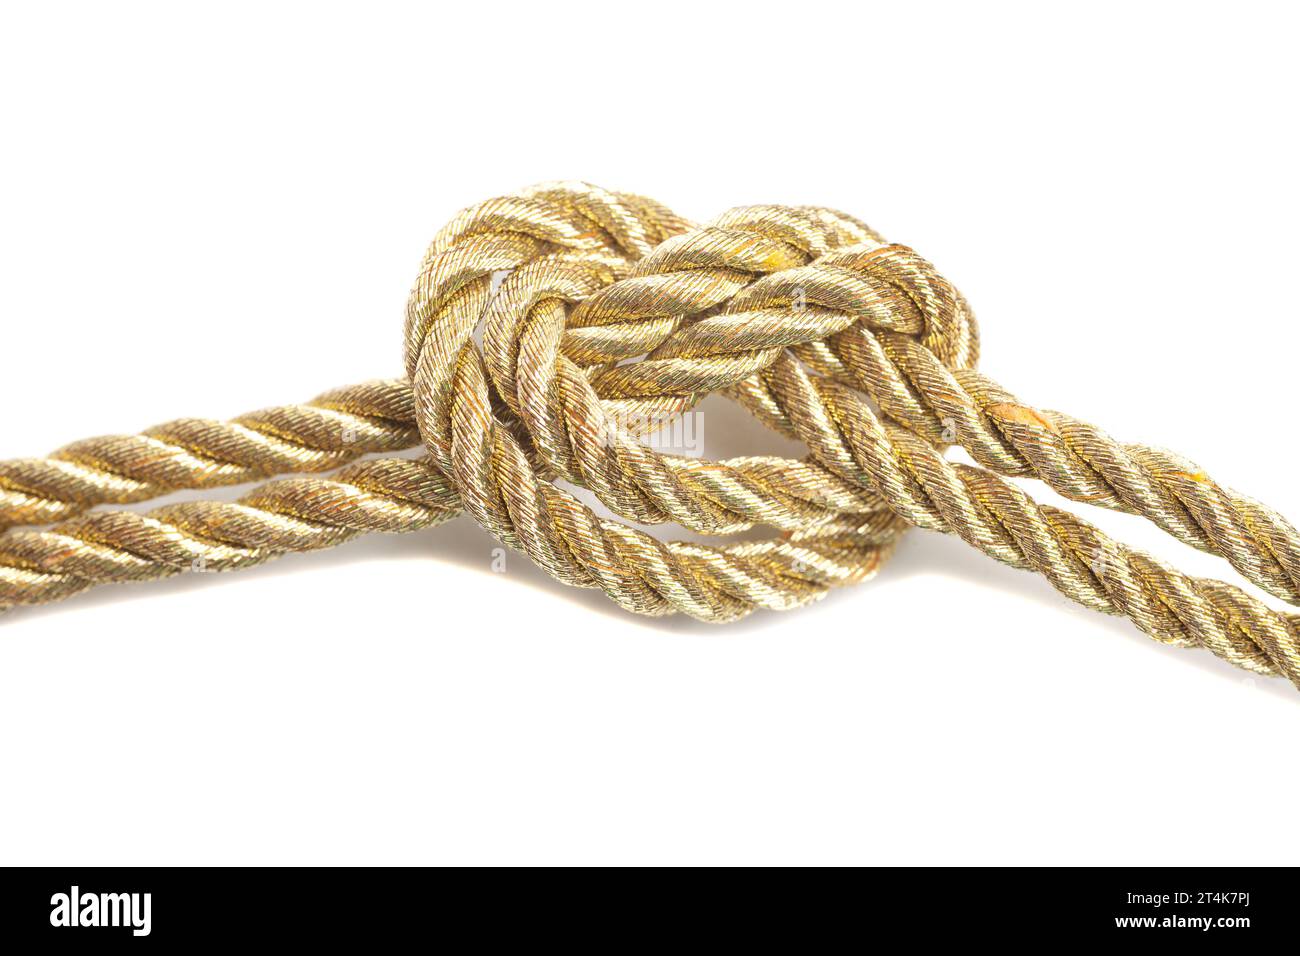 Golden rope tied in a knot isolated on a white background. Stock Photo